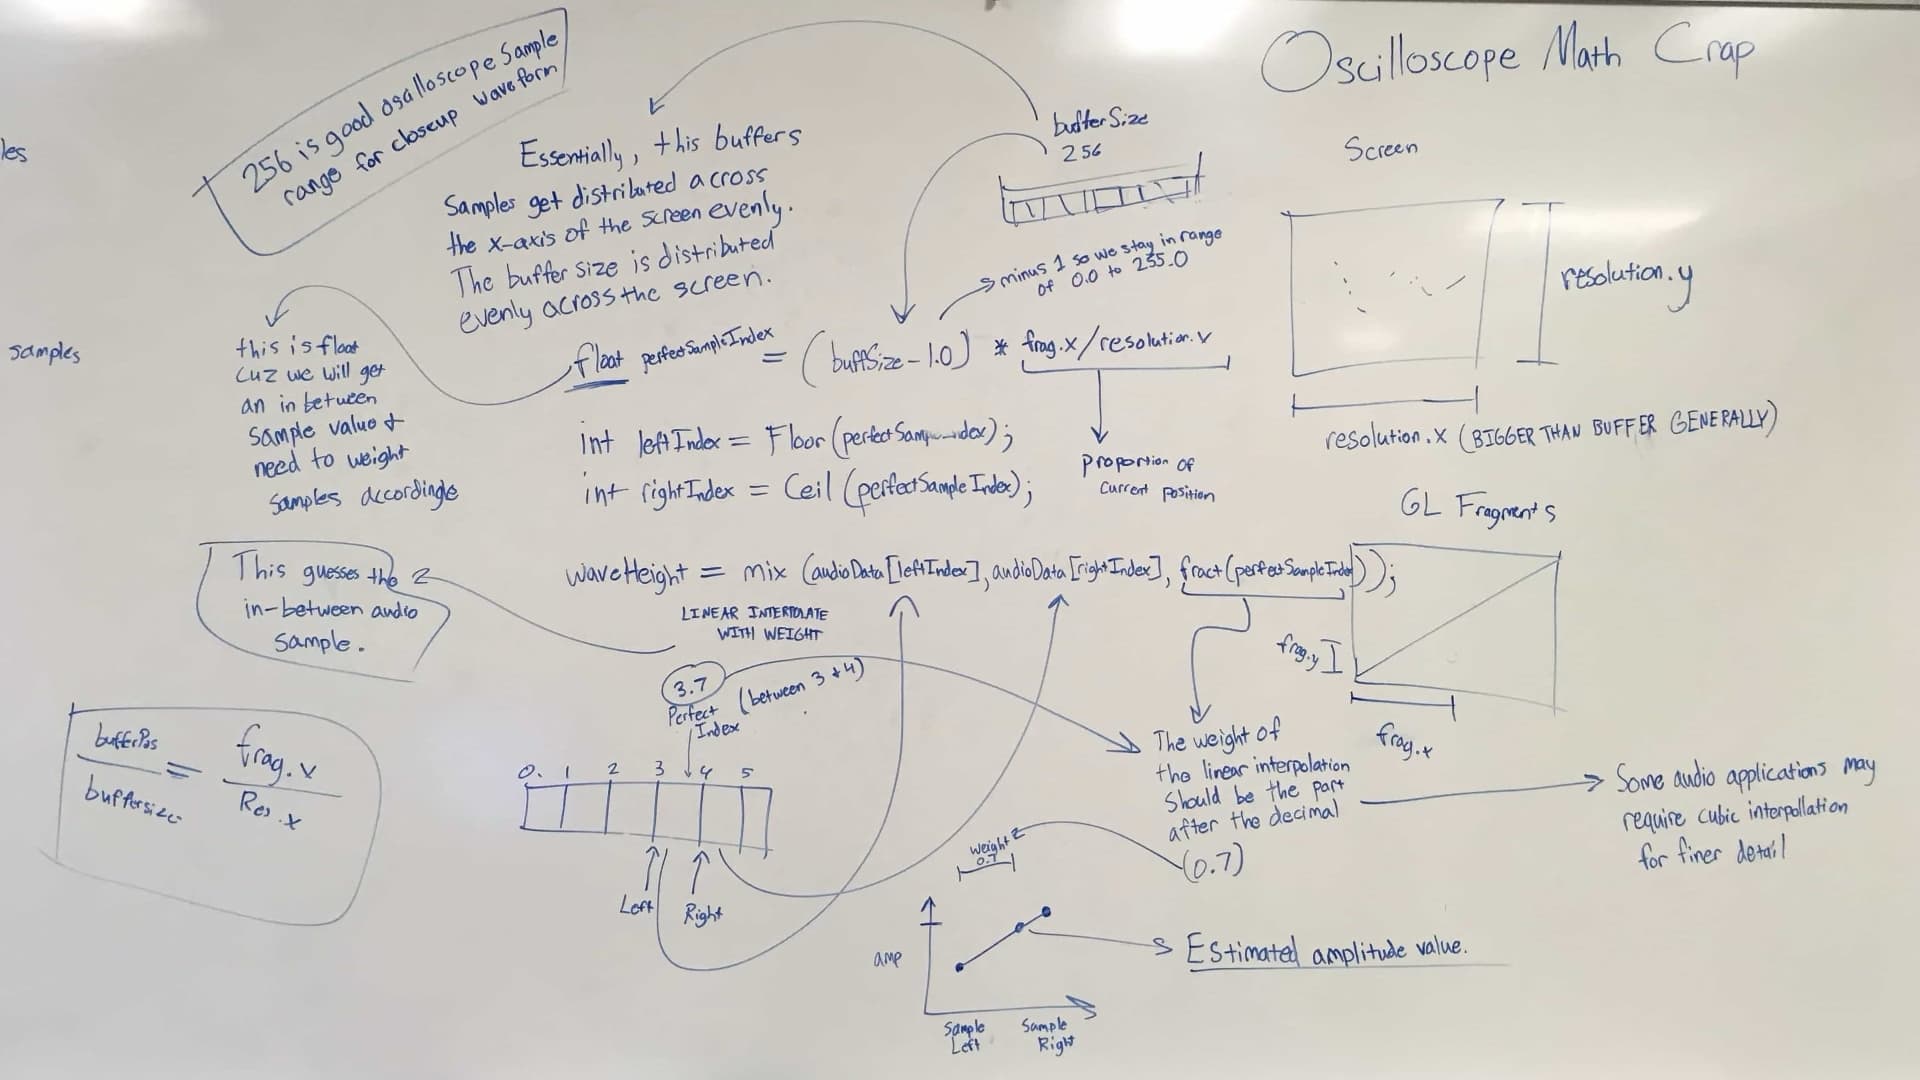 Sketches and text on a whiteboard describing the math required to render an oscilloscope. It mentions 256 being a good range of samples for visualizing in a close-up oscilloscope waveform.